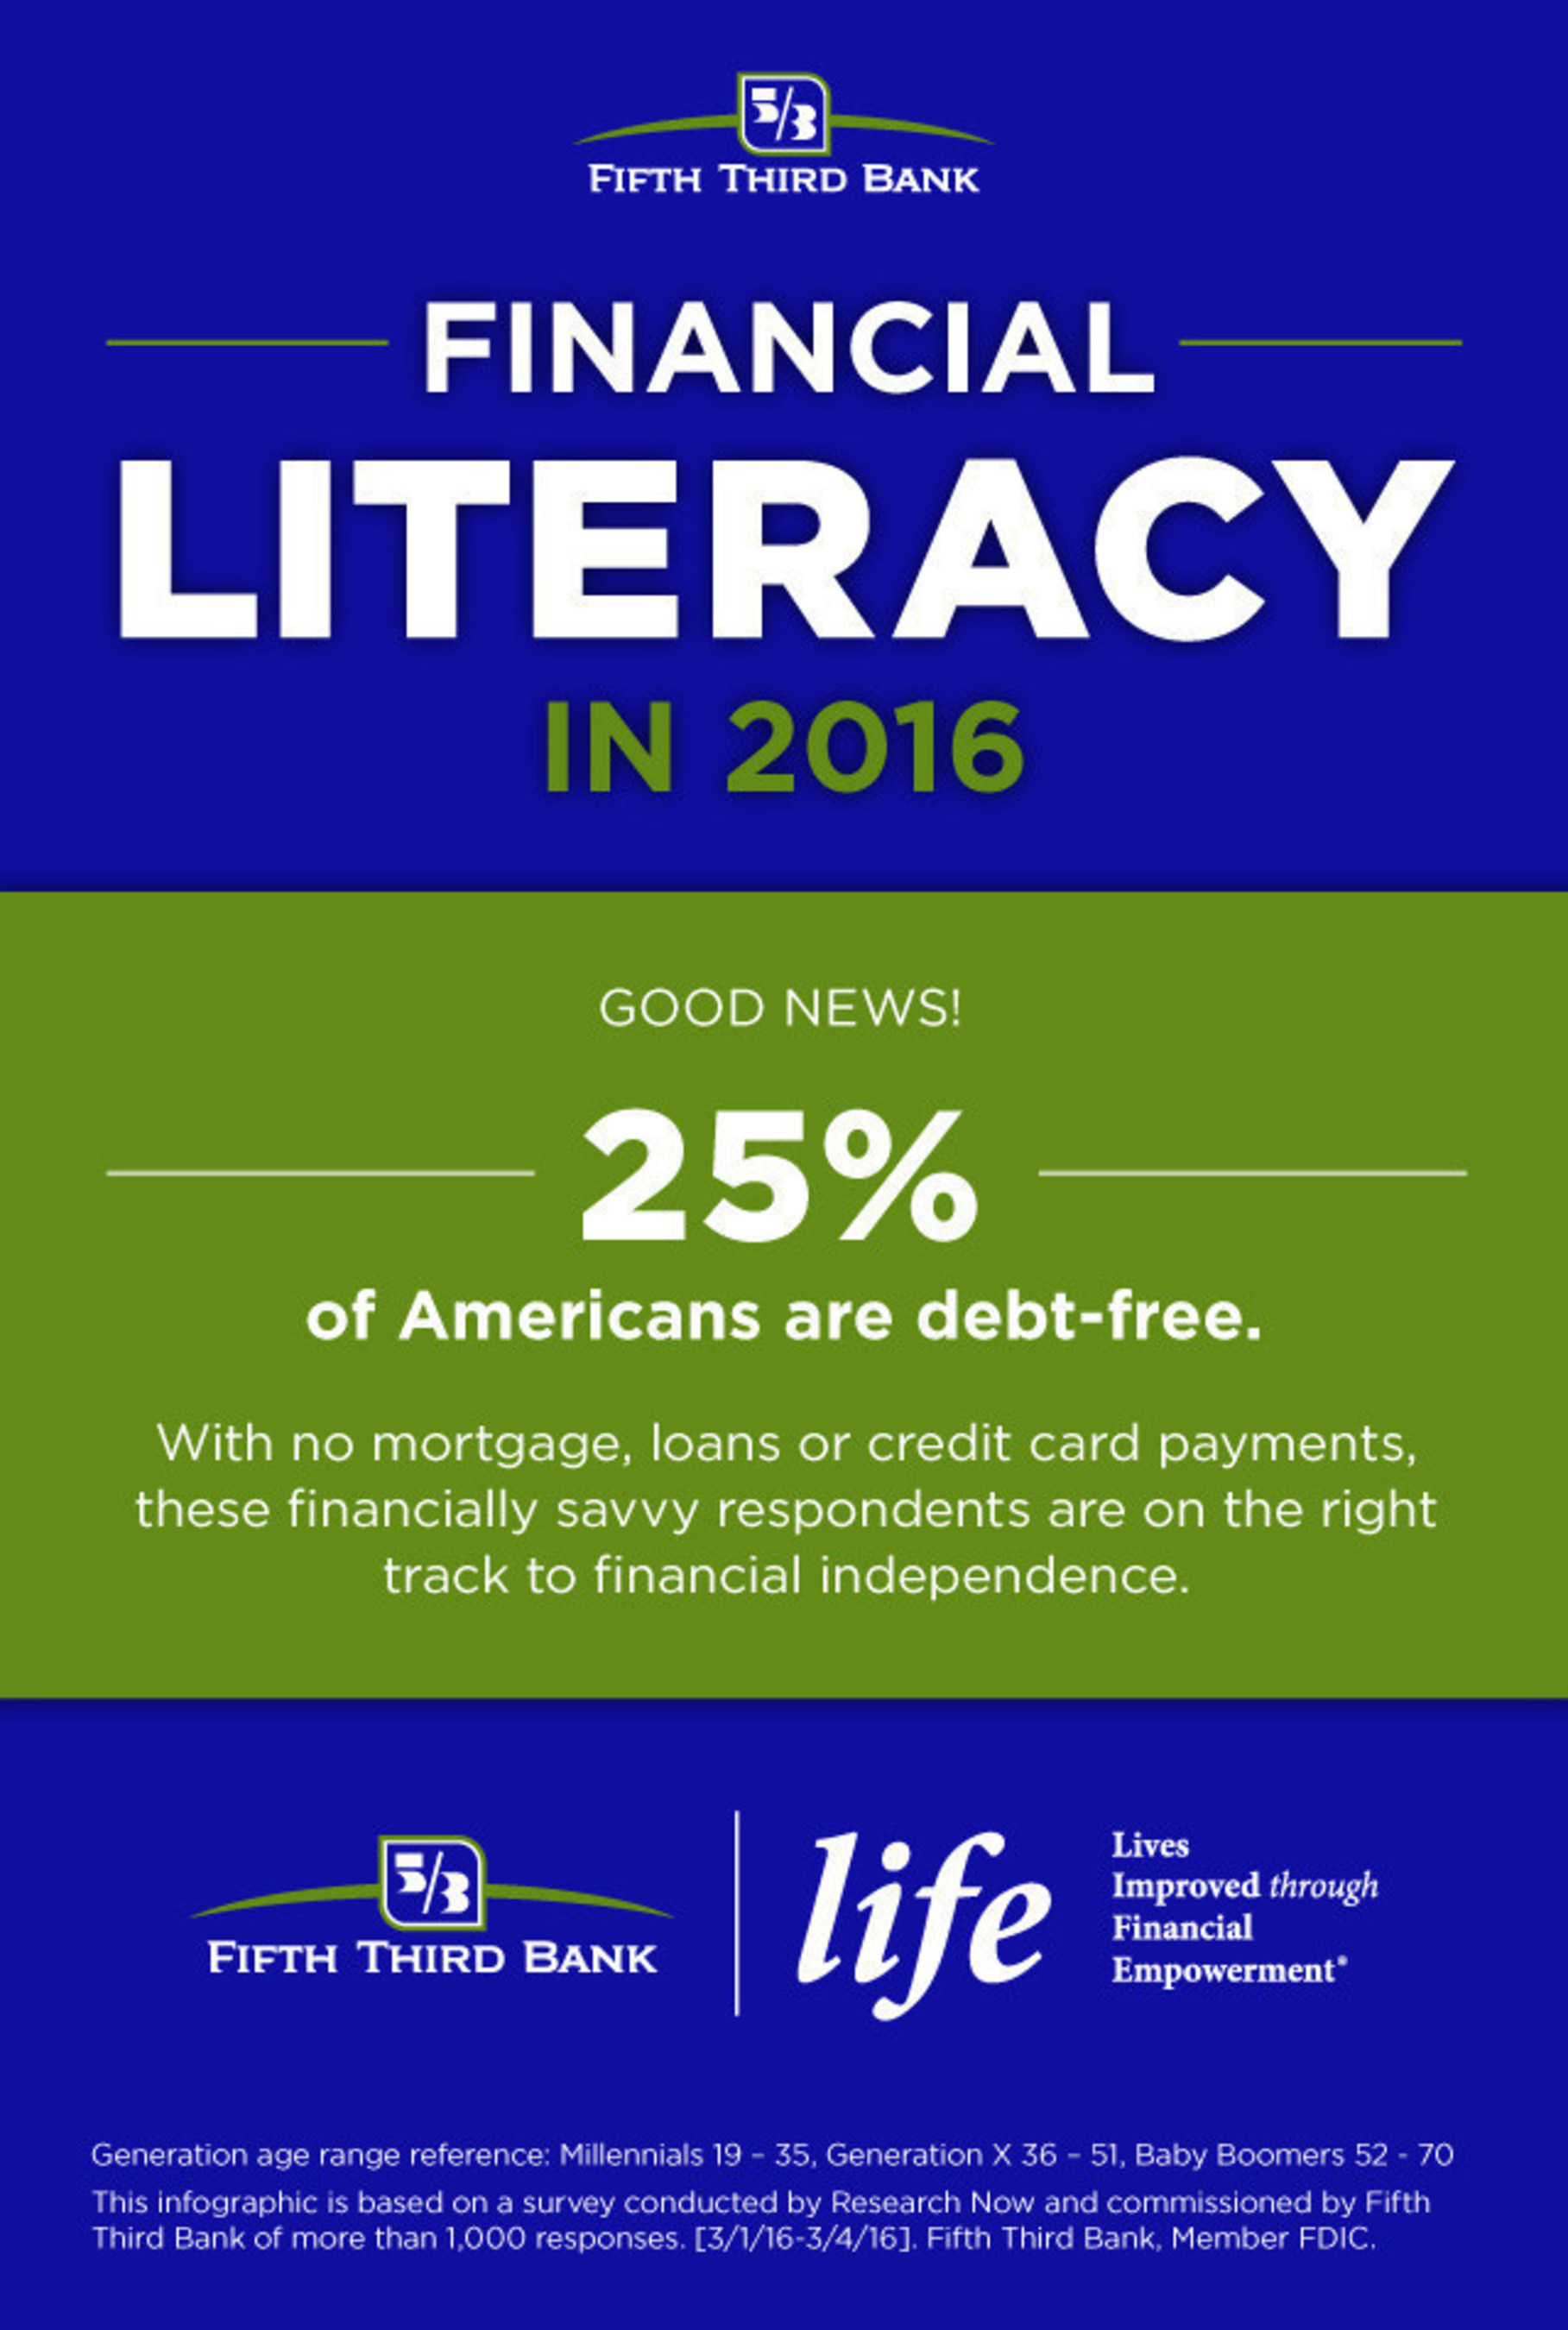 According to a recent study from Fifth Third Bank, one in four Americans are debt-free.